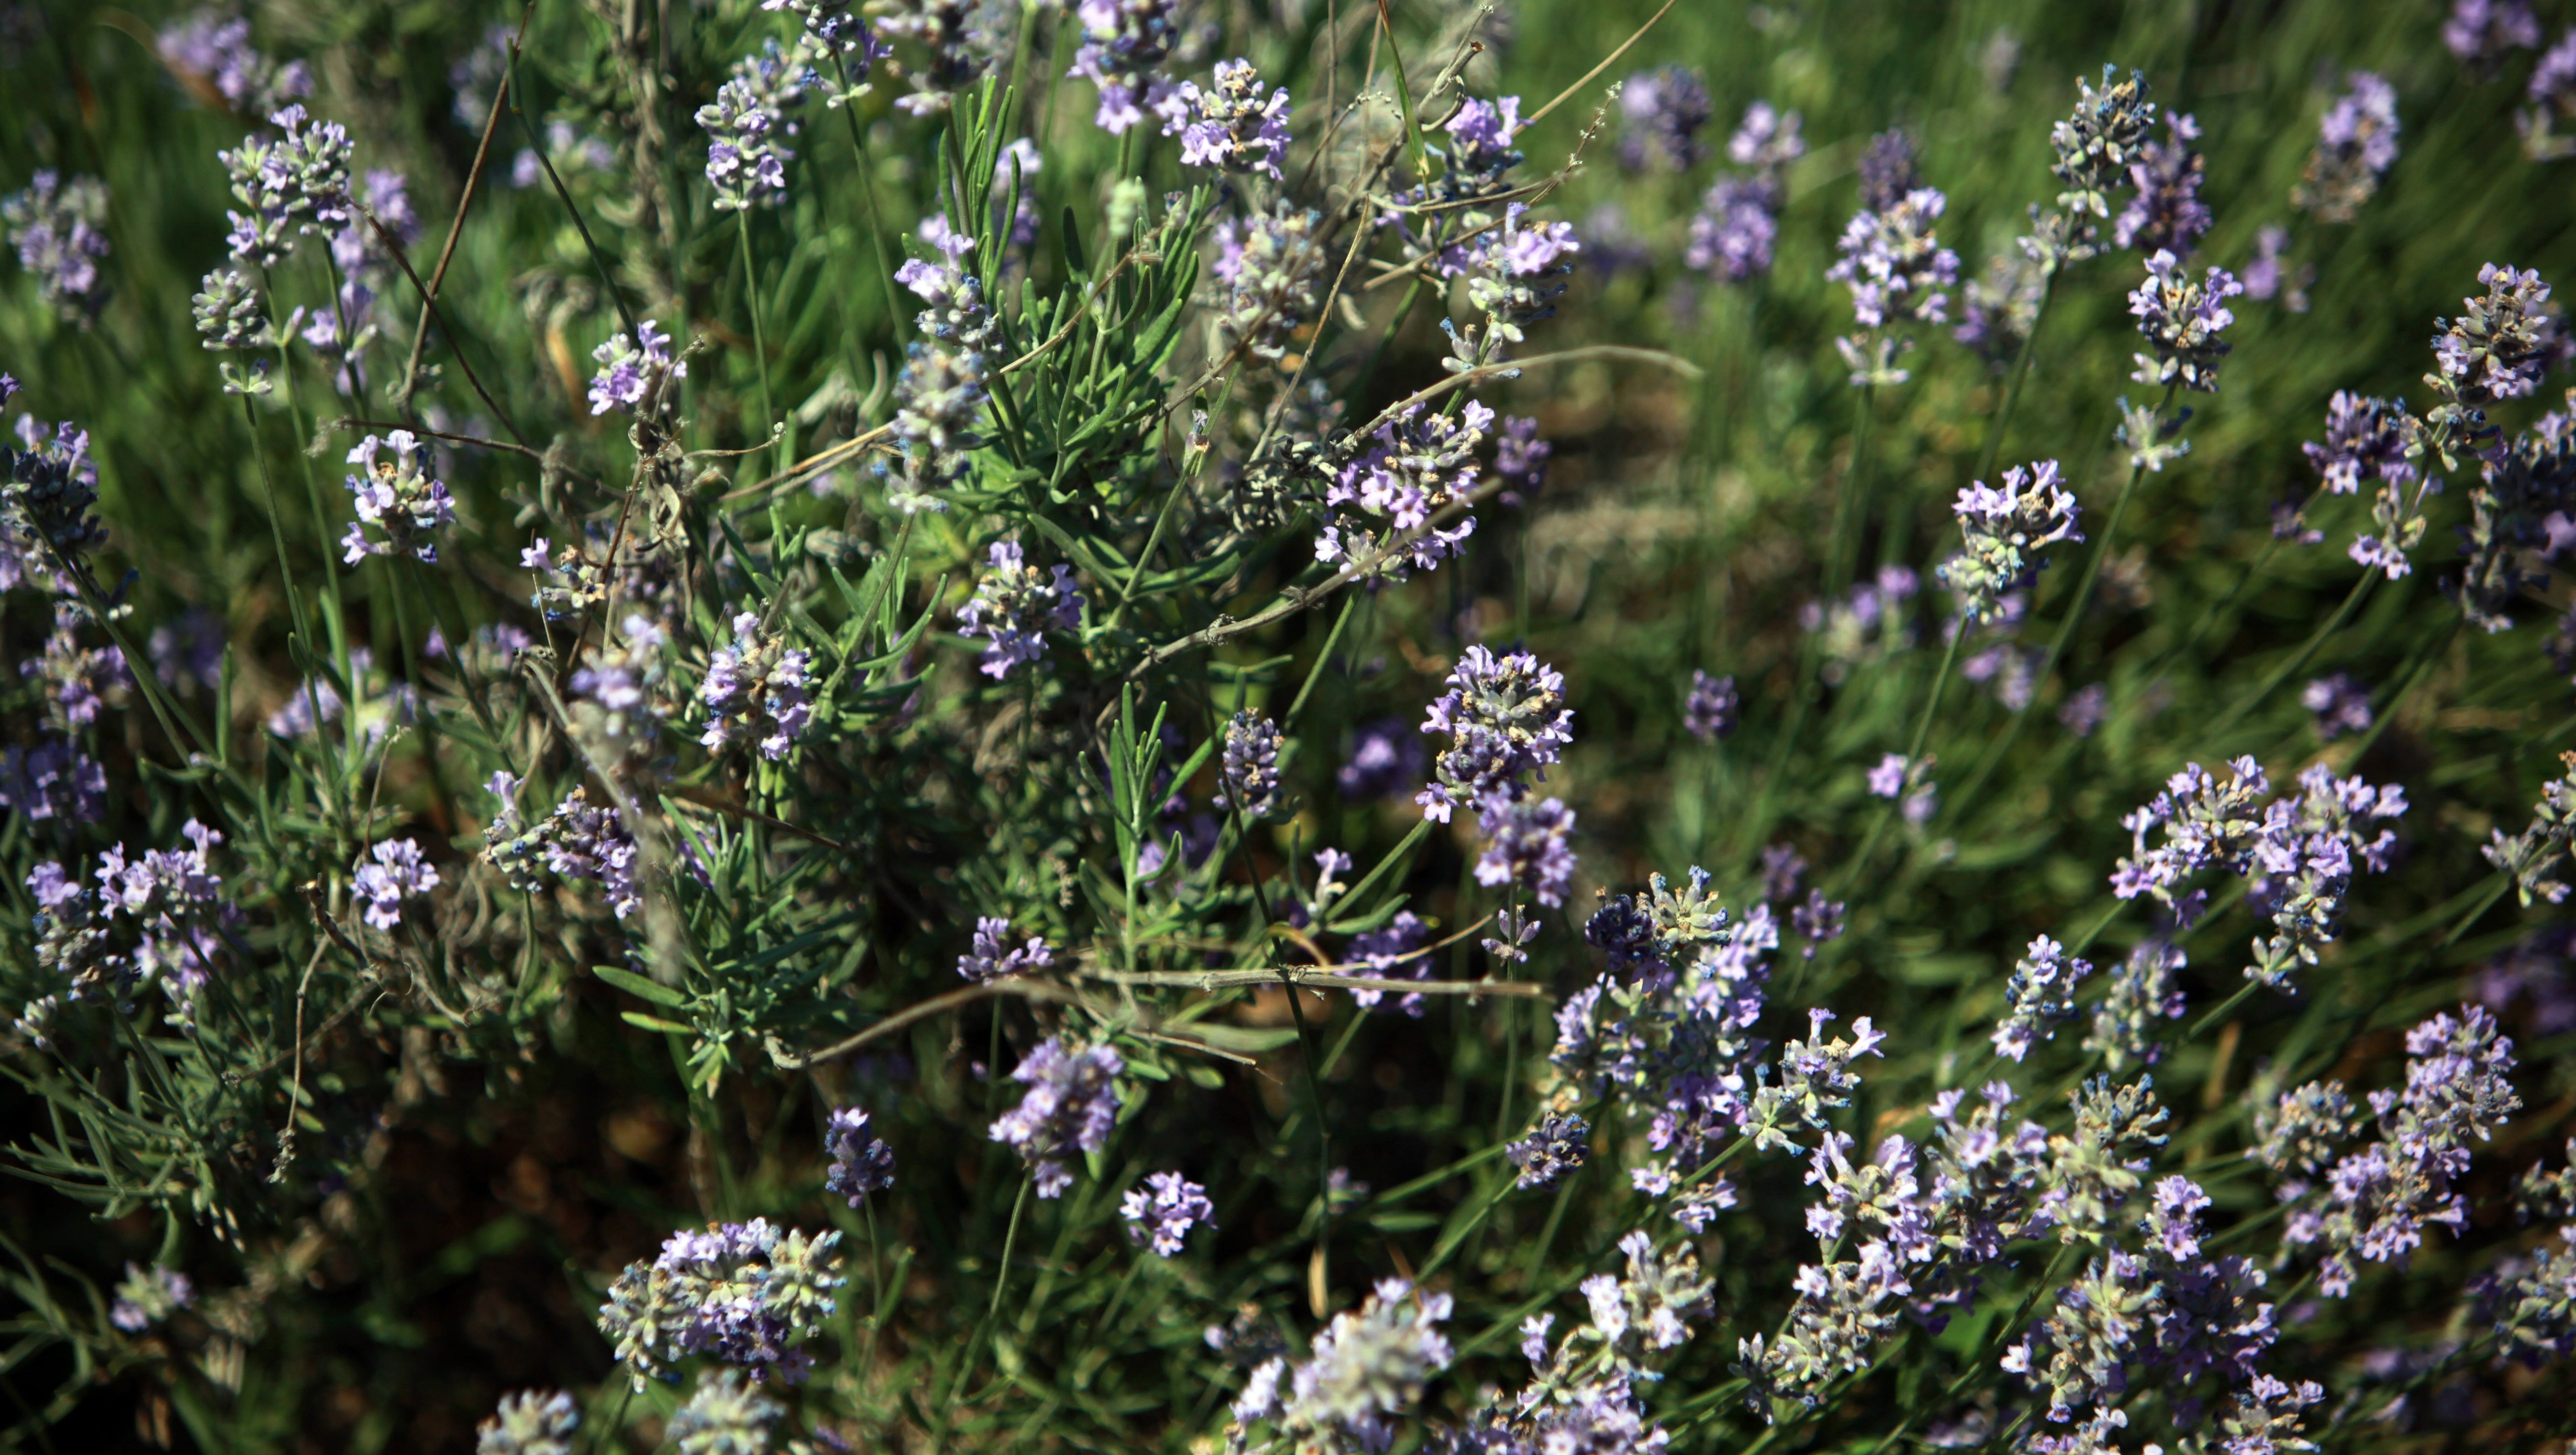 As much as you may be tempted, hold off on pruning lavender until spring